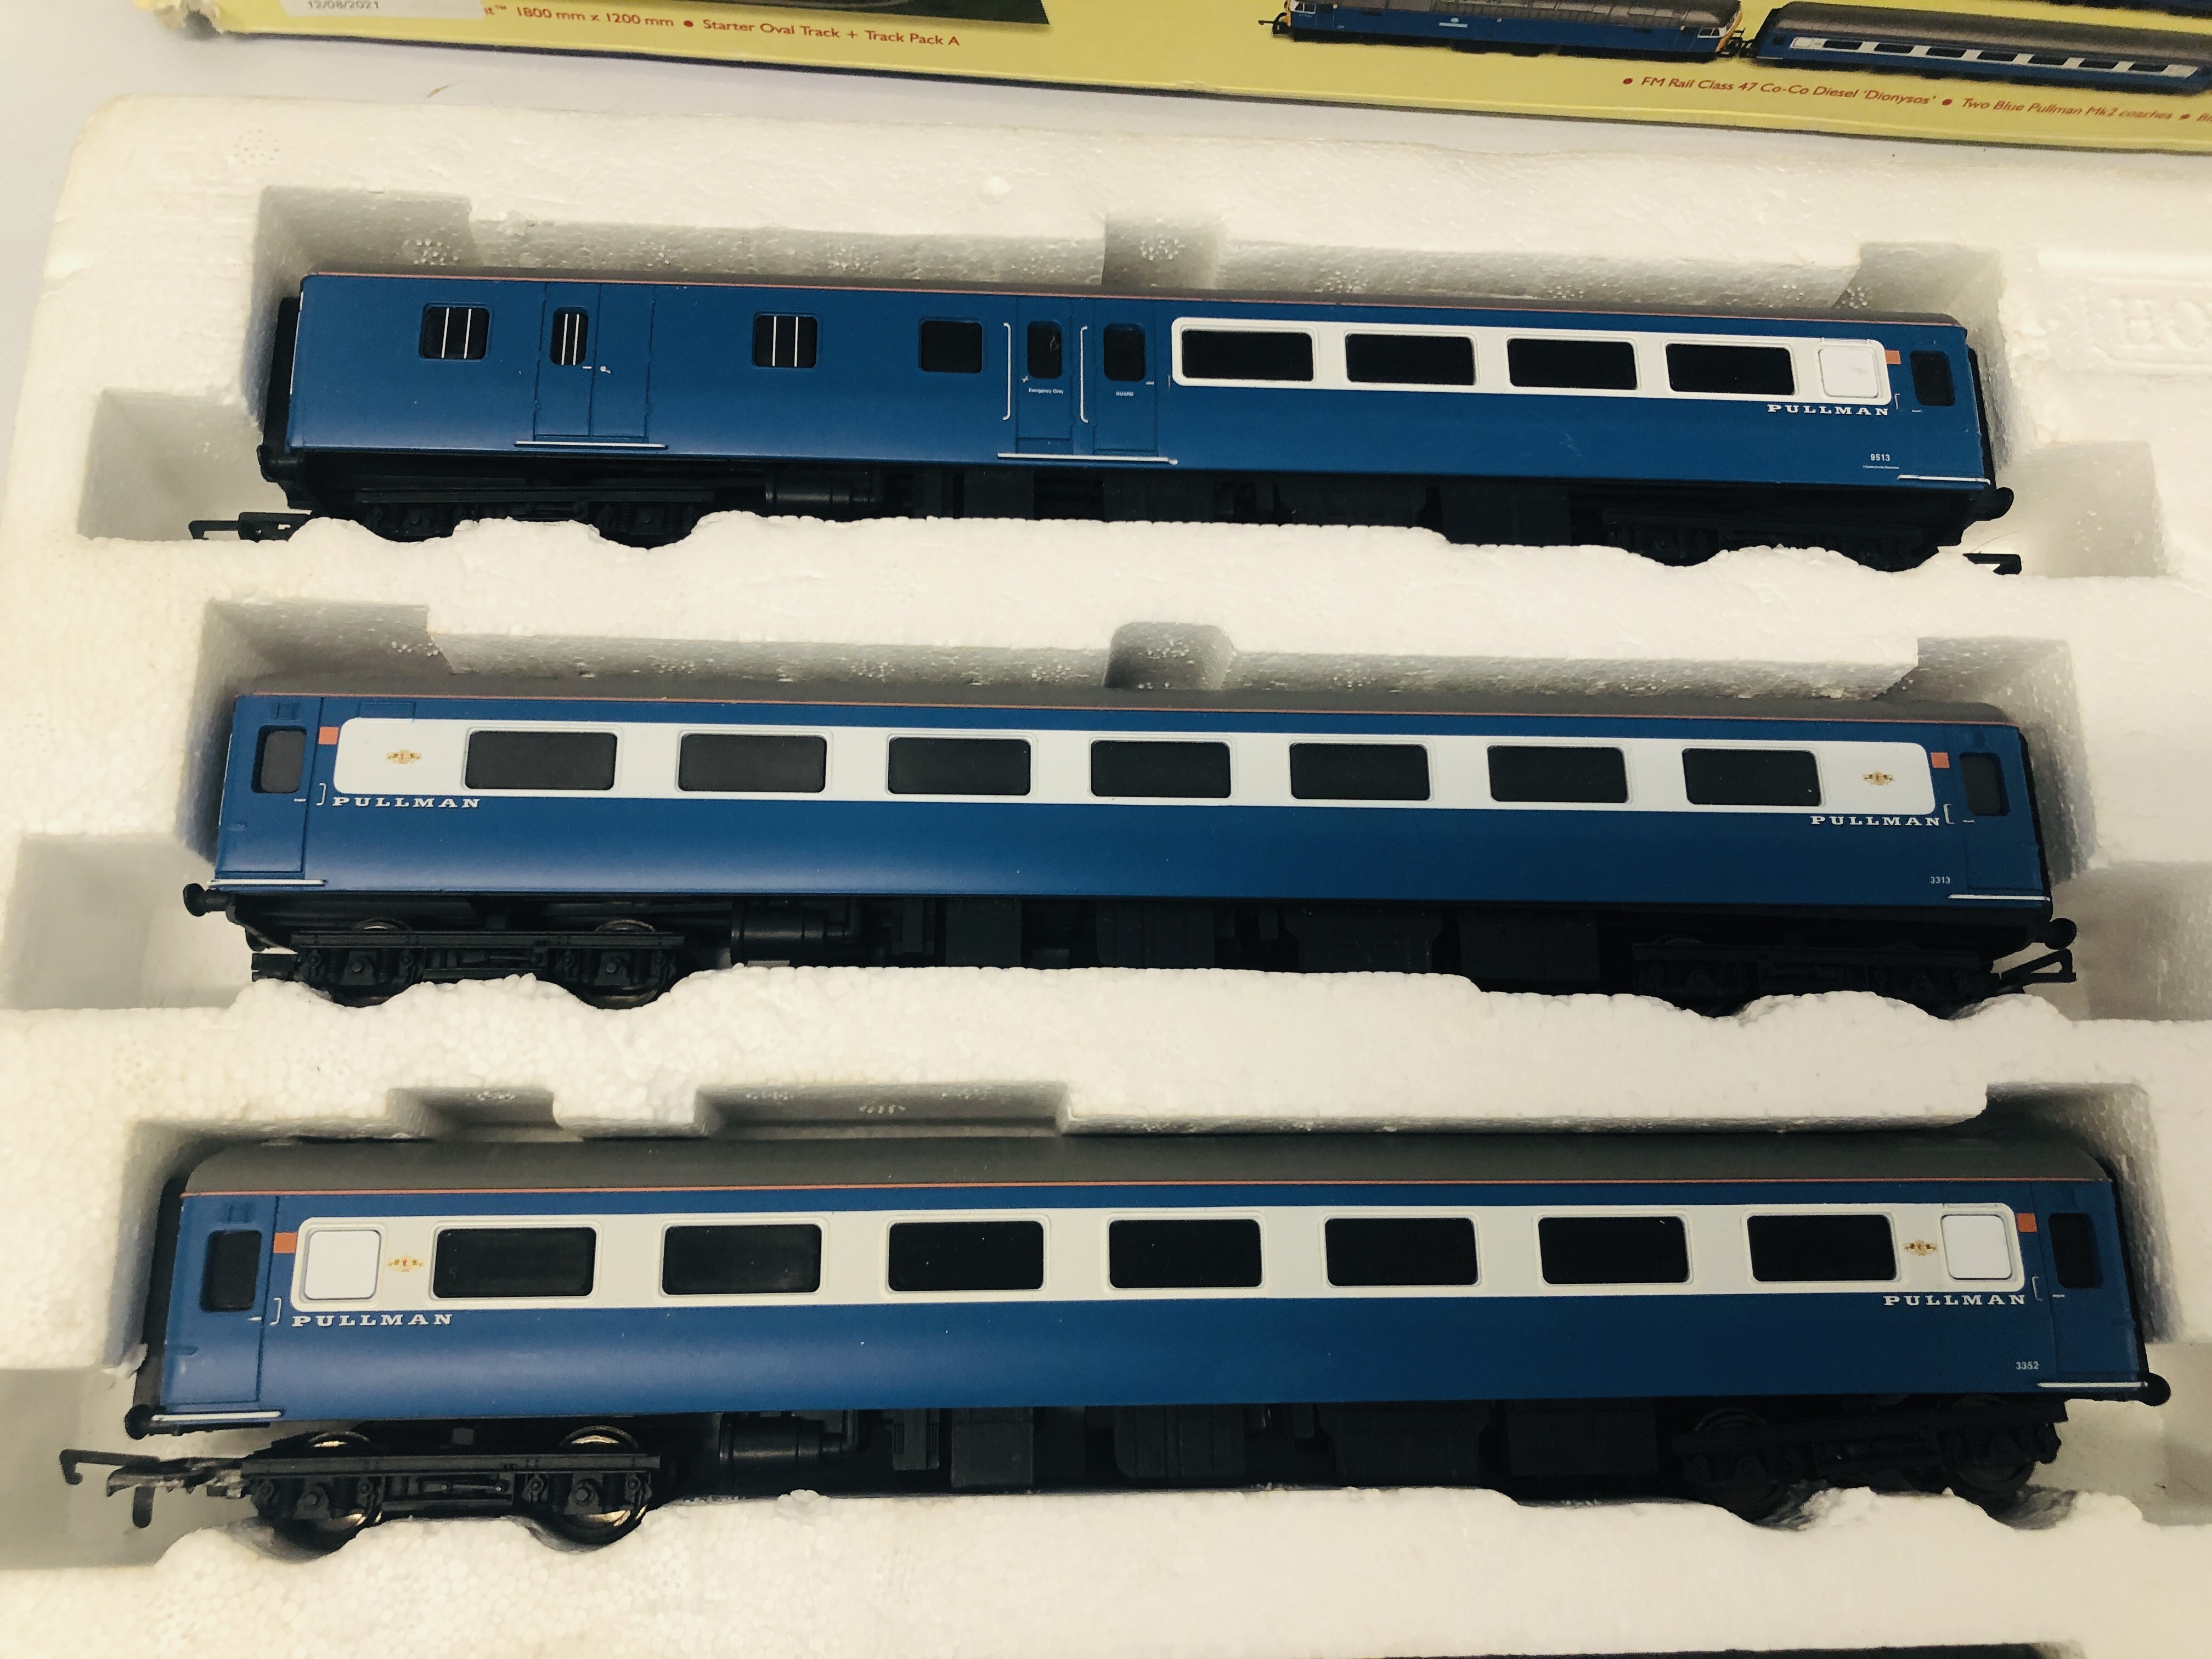 HORNBY "THE BLUE PULLMAN" 00 GAUGE R1093 ELECTRIC TRAIN SET BOXED - SOLD AS SEEN - Image 2 of 7